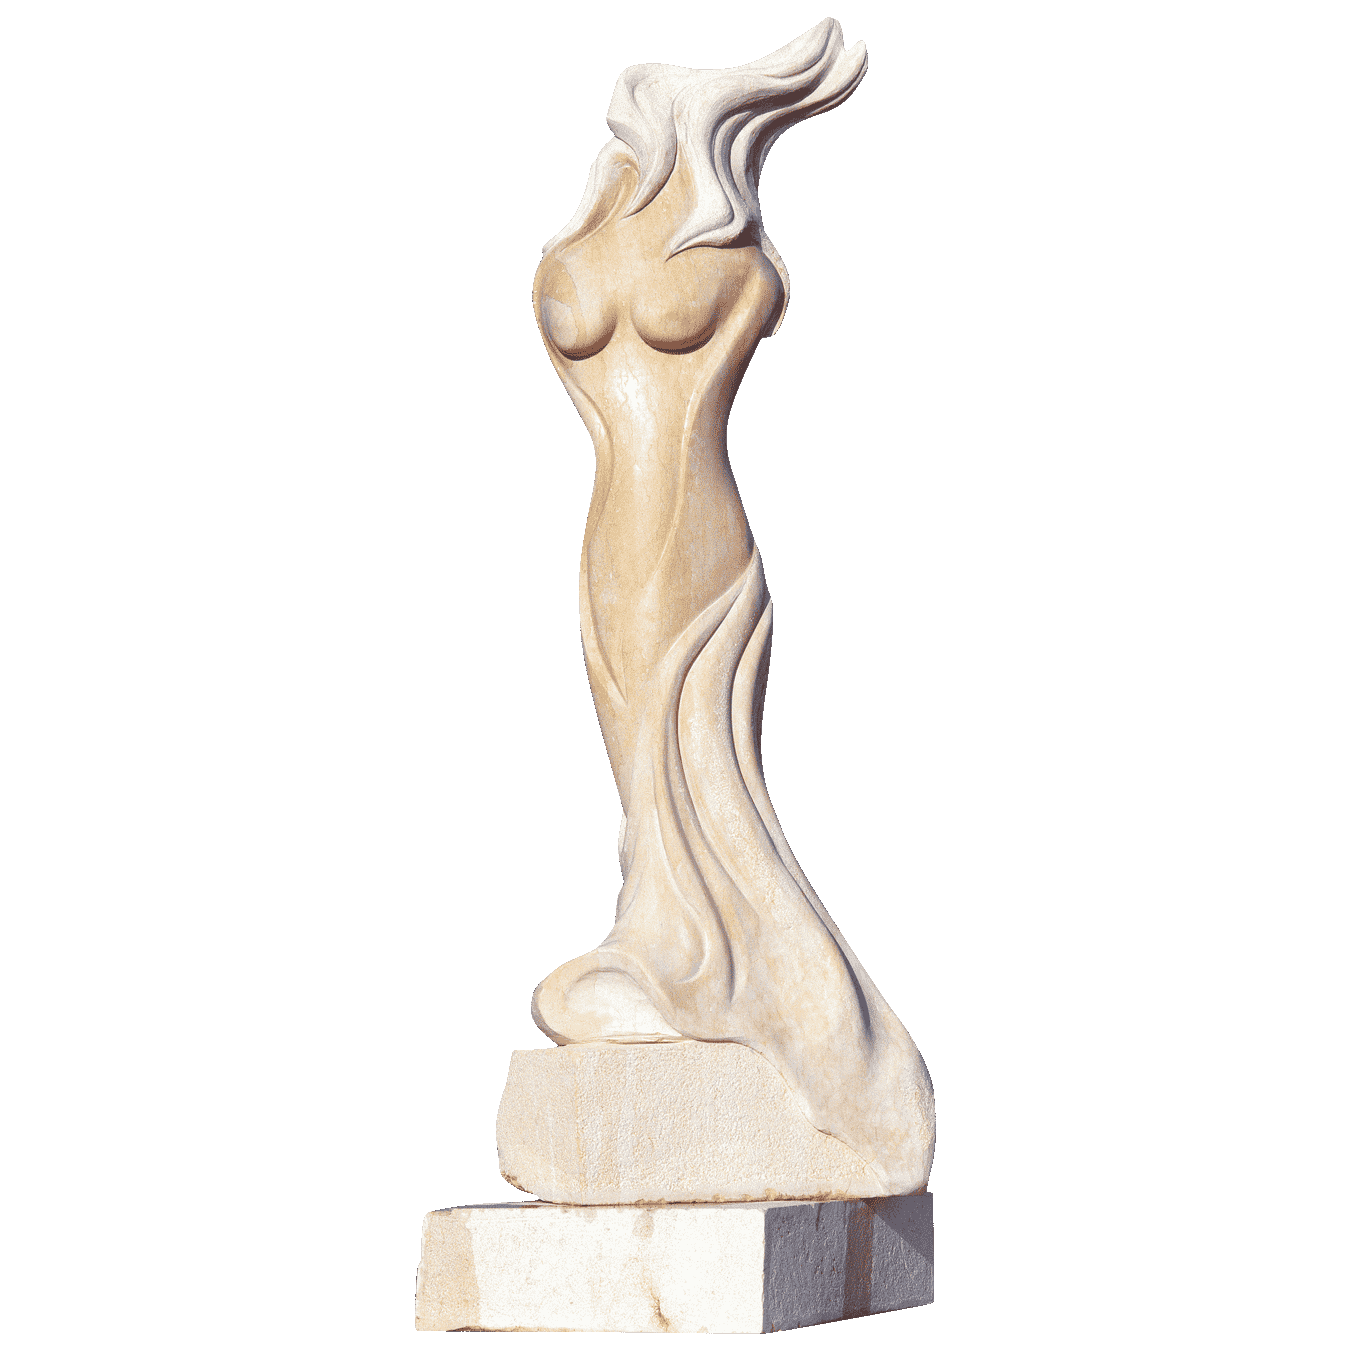 work from Woman (Stone) category